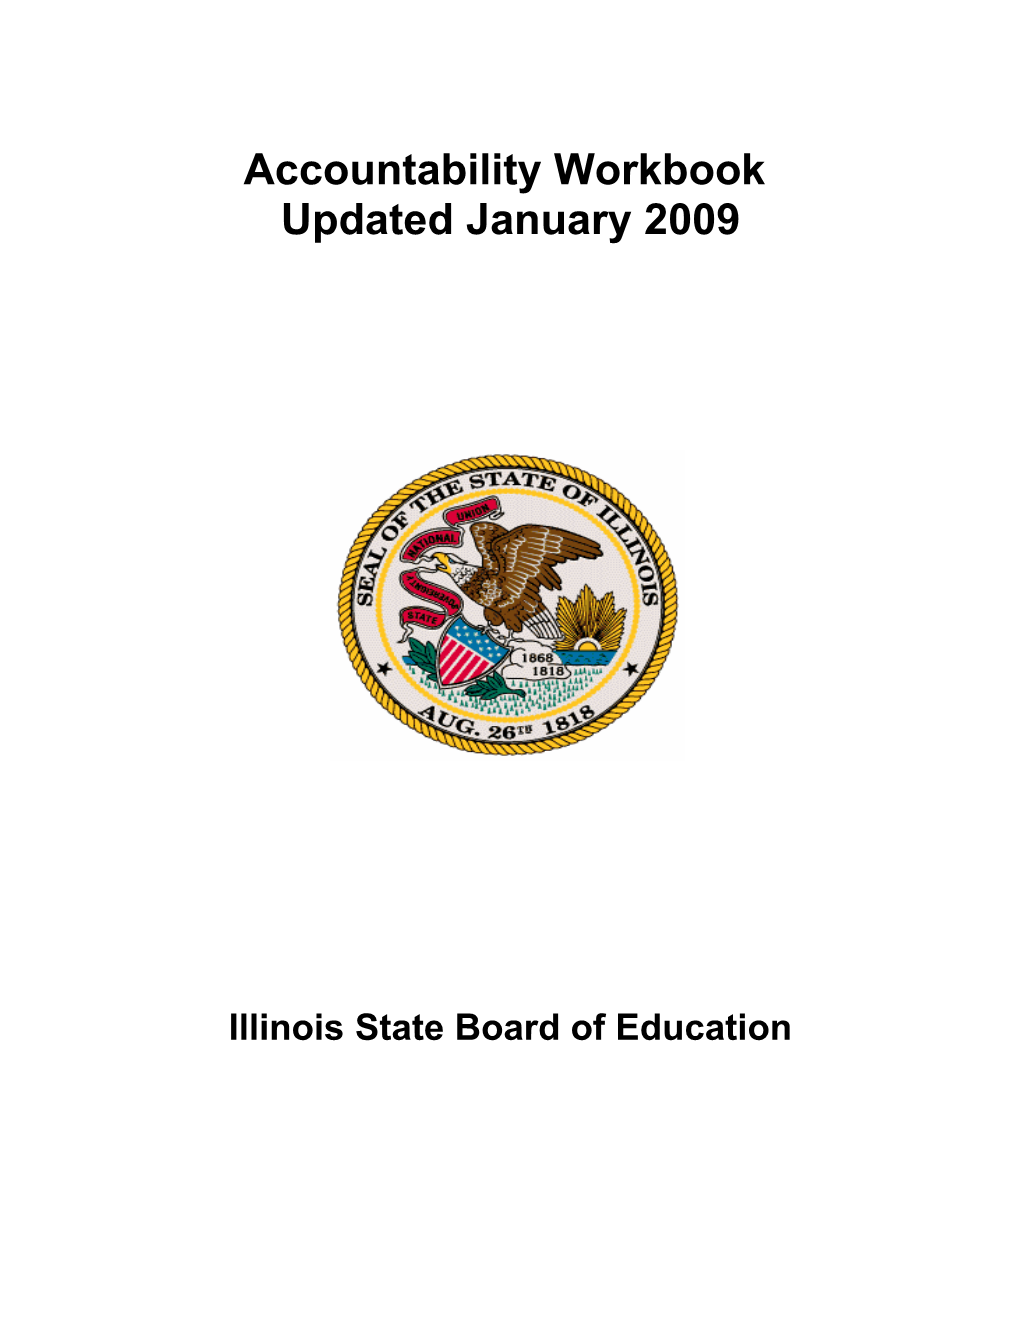 Illinois State Accountability Workbook Revised January 2009 (MS Word)